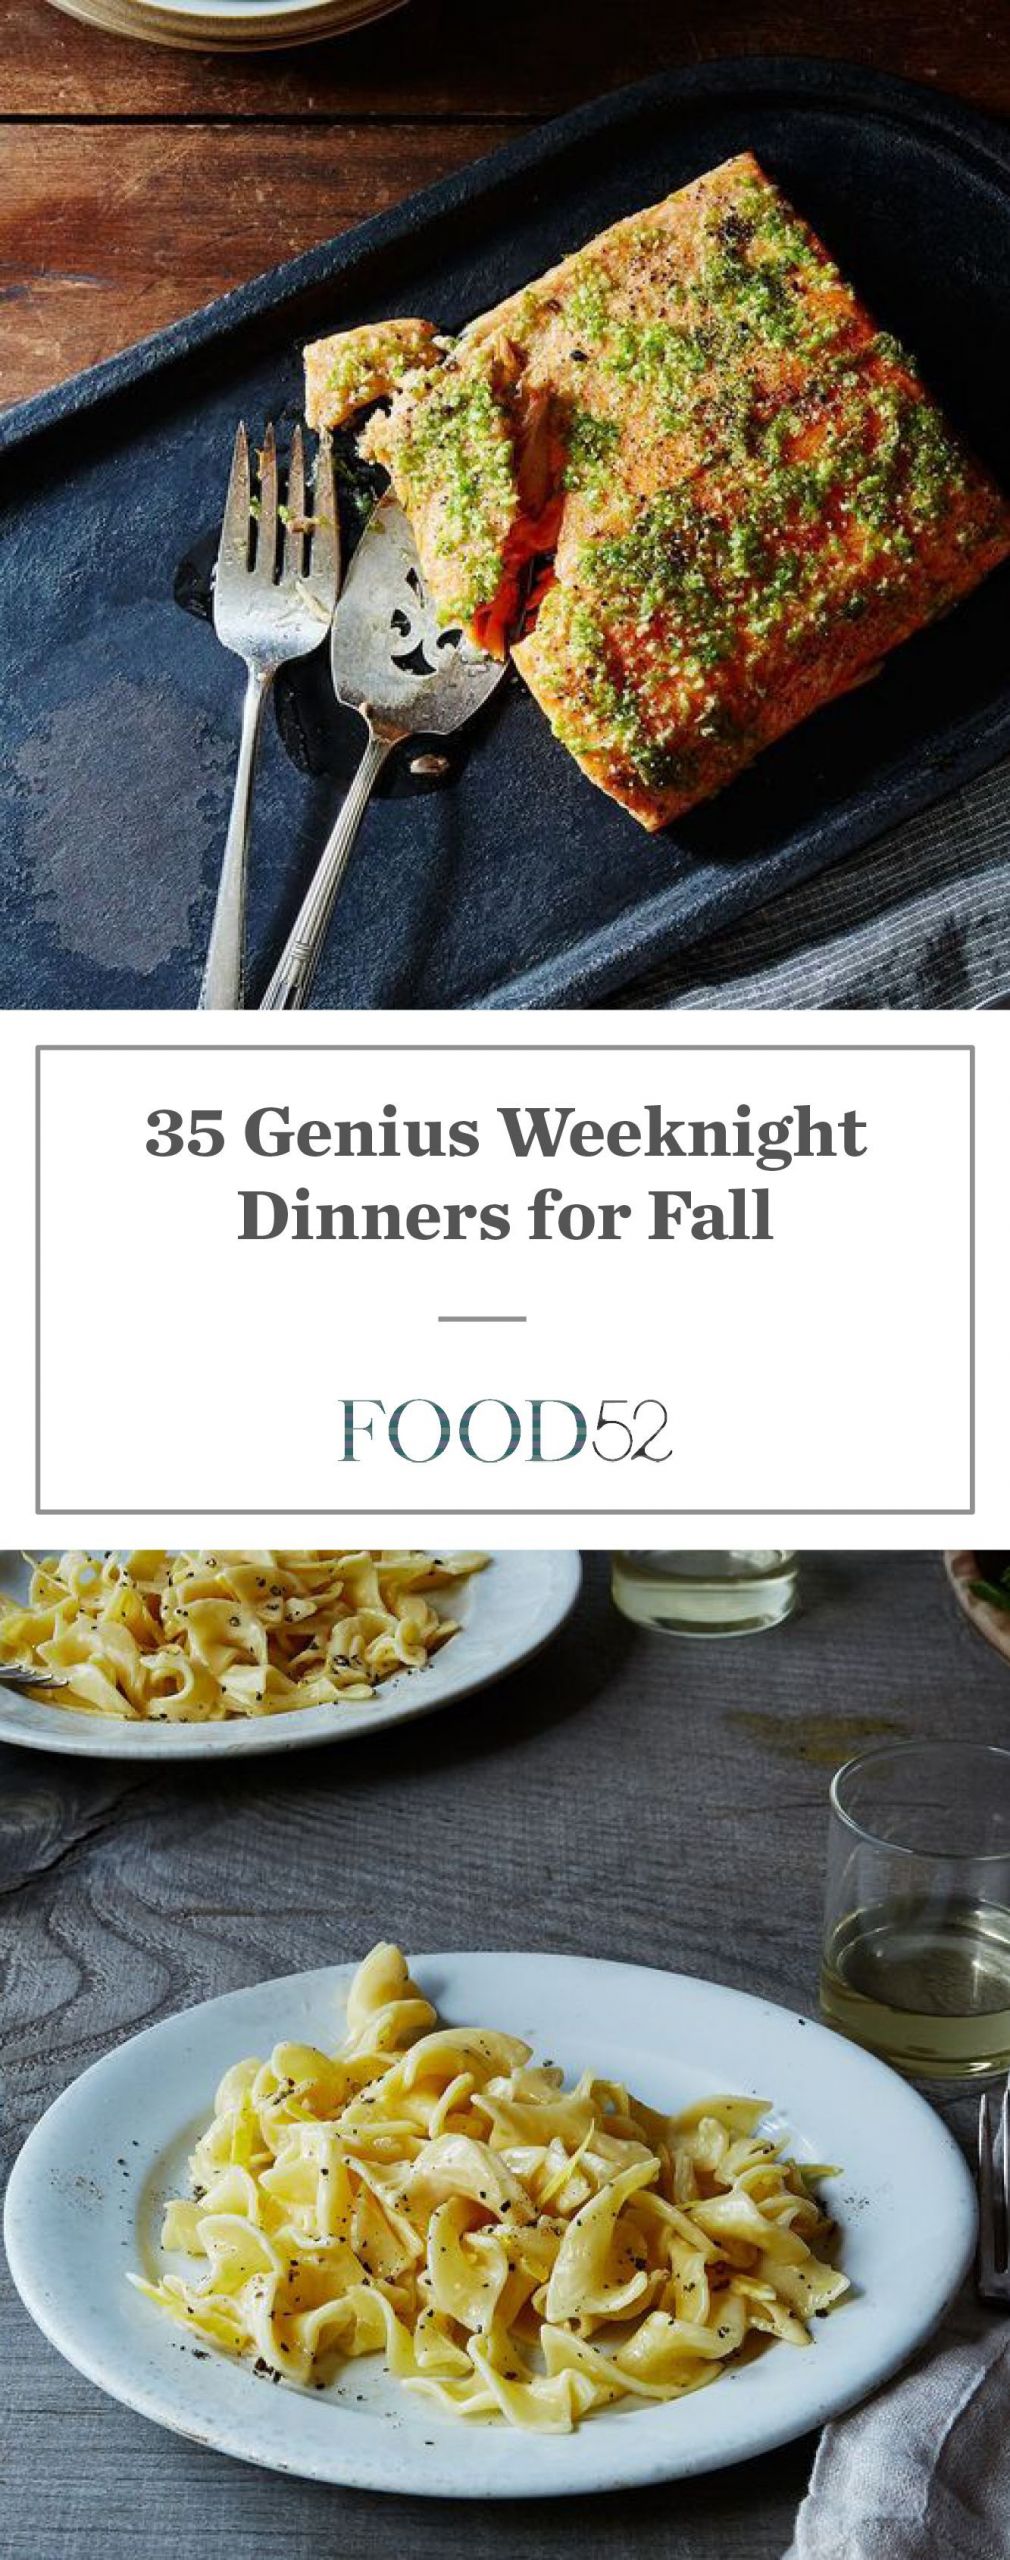 Fall Weeknight Dinners
 35 Genius Weeknight Dinners for Fall and Beyond